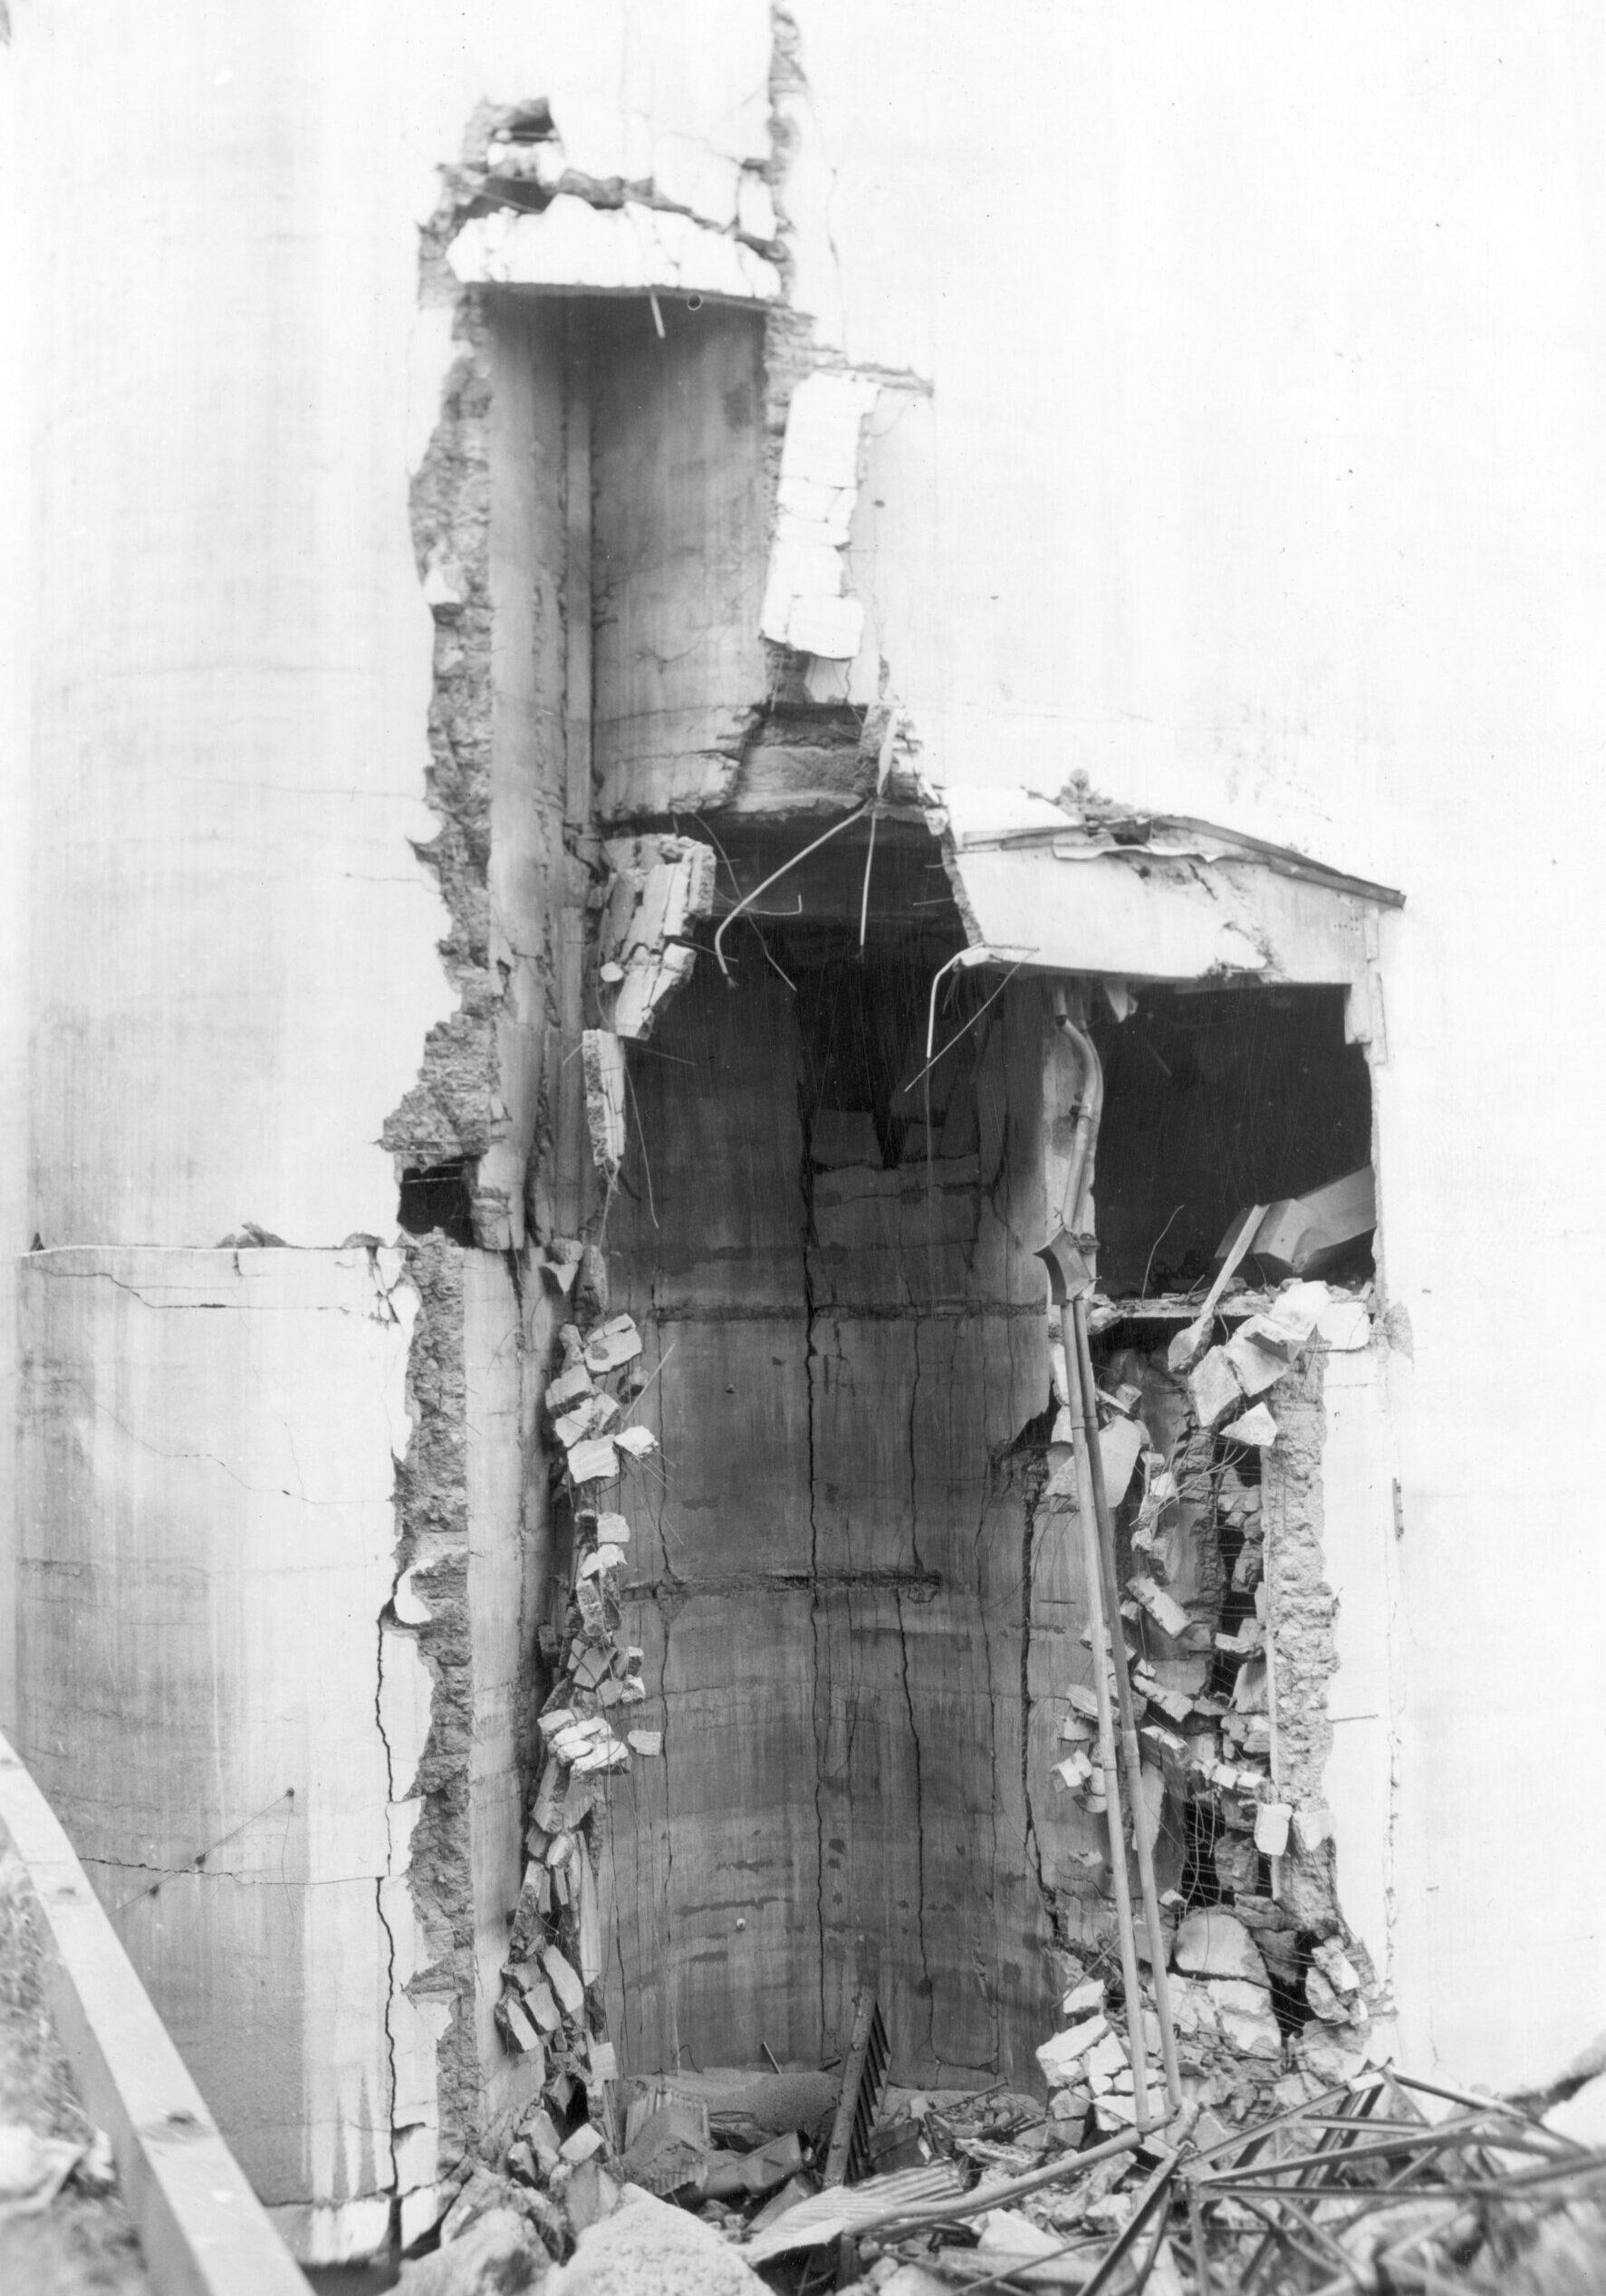 SASKATCHEWAN 5 EXPLOSION Tank at East End Annex No. 1 Used as StairwayPaterson Archives 6737